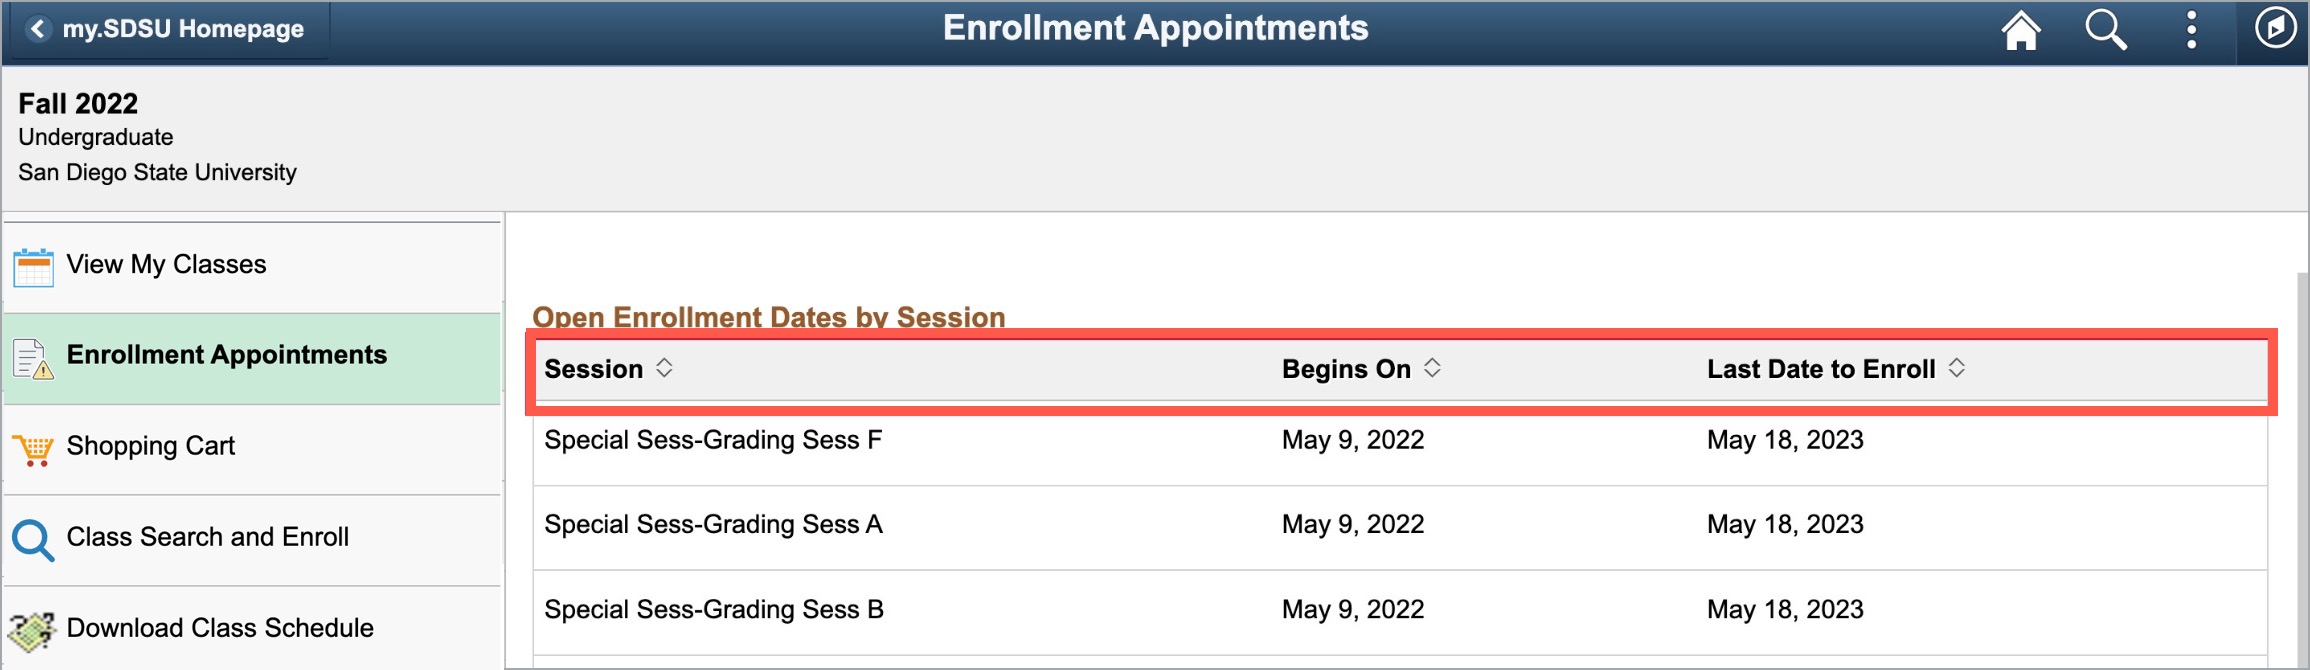 Open Enrollment Dates by Session on the Enrollment Appointments screen.